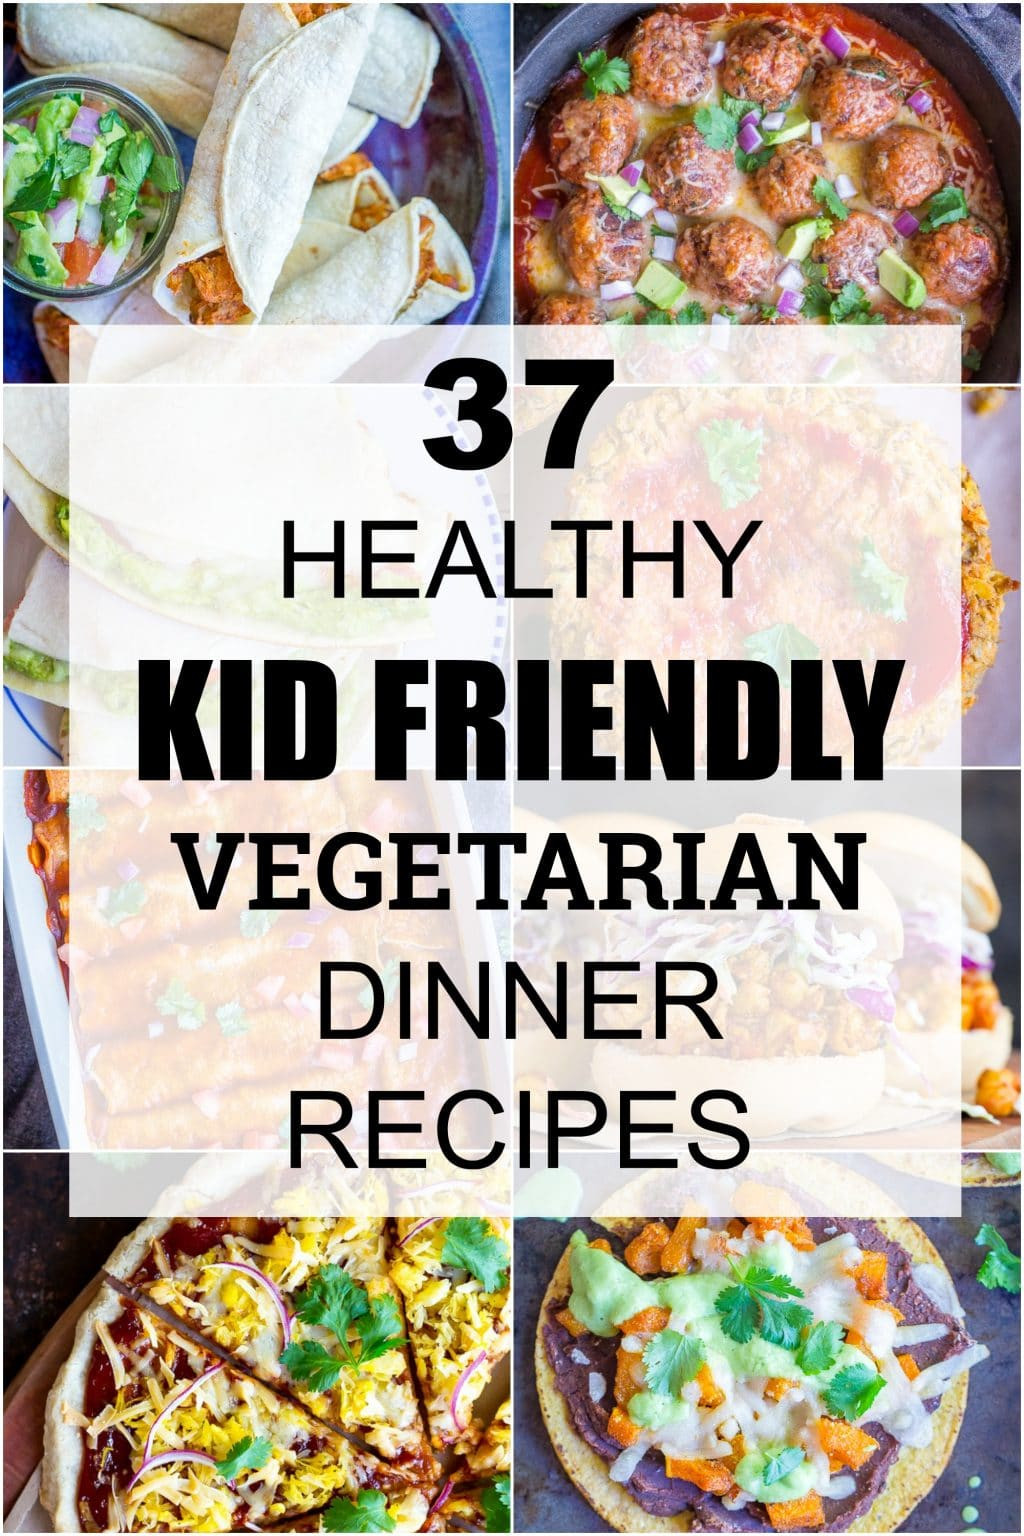 Easy Healthy Dinner Recipes For Kids
 37 Healthy Kid Friendly Ve arian Dinner Recipes She